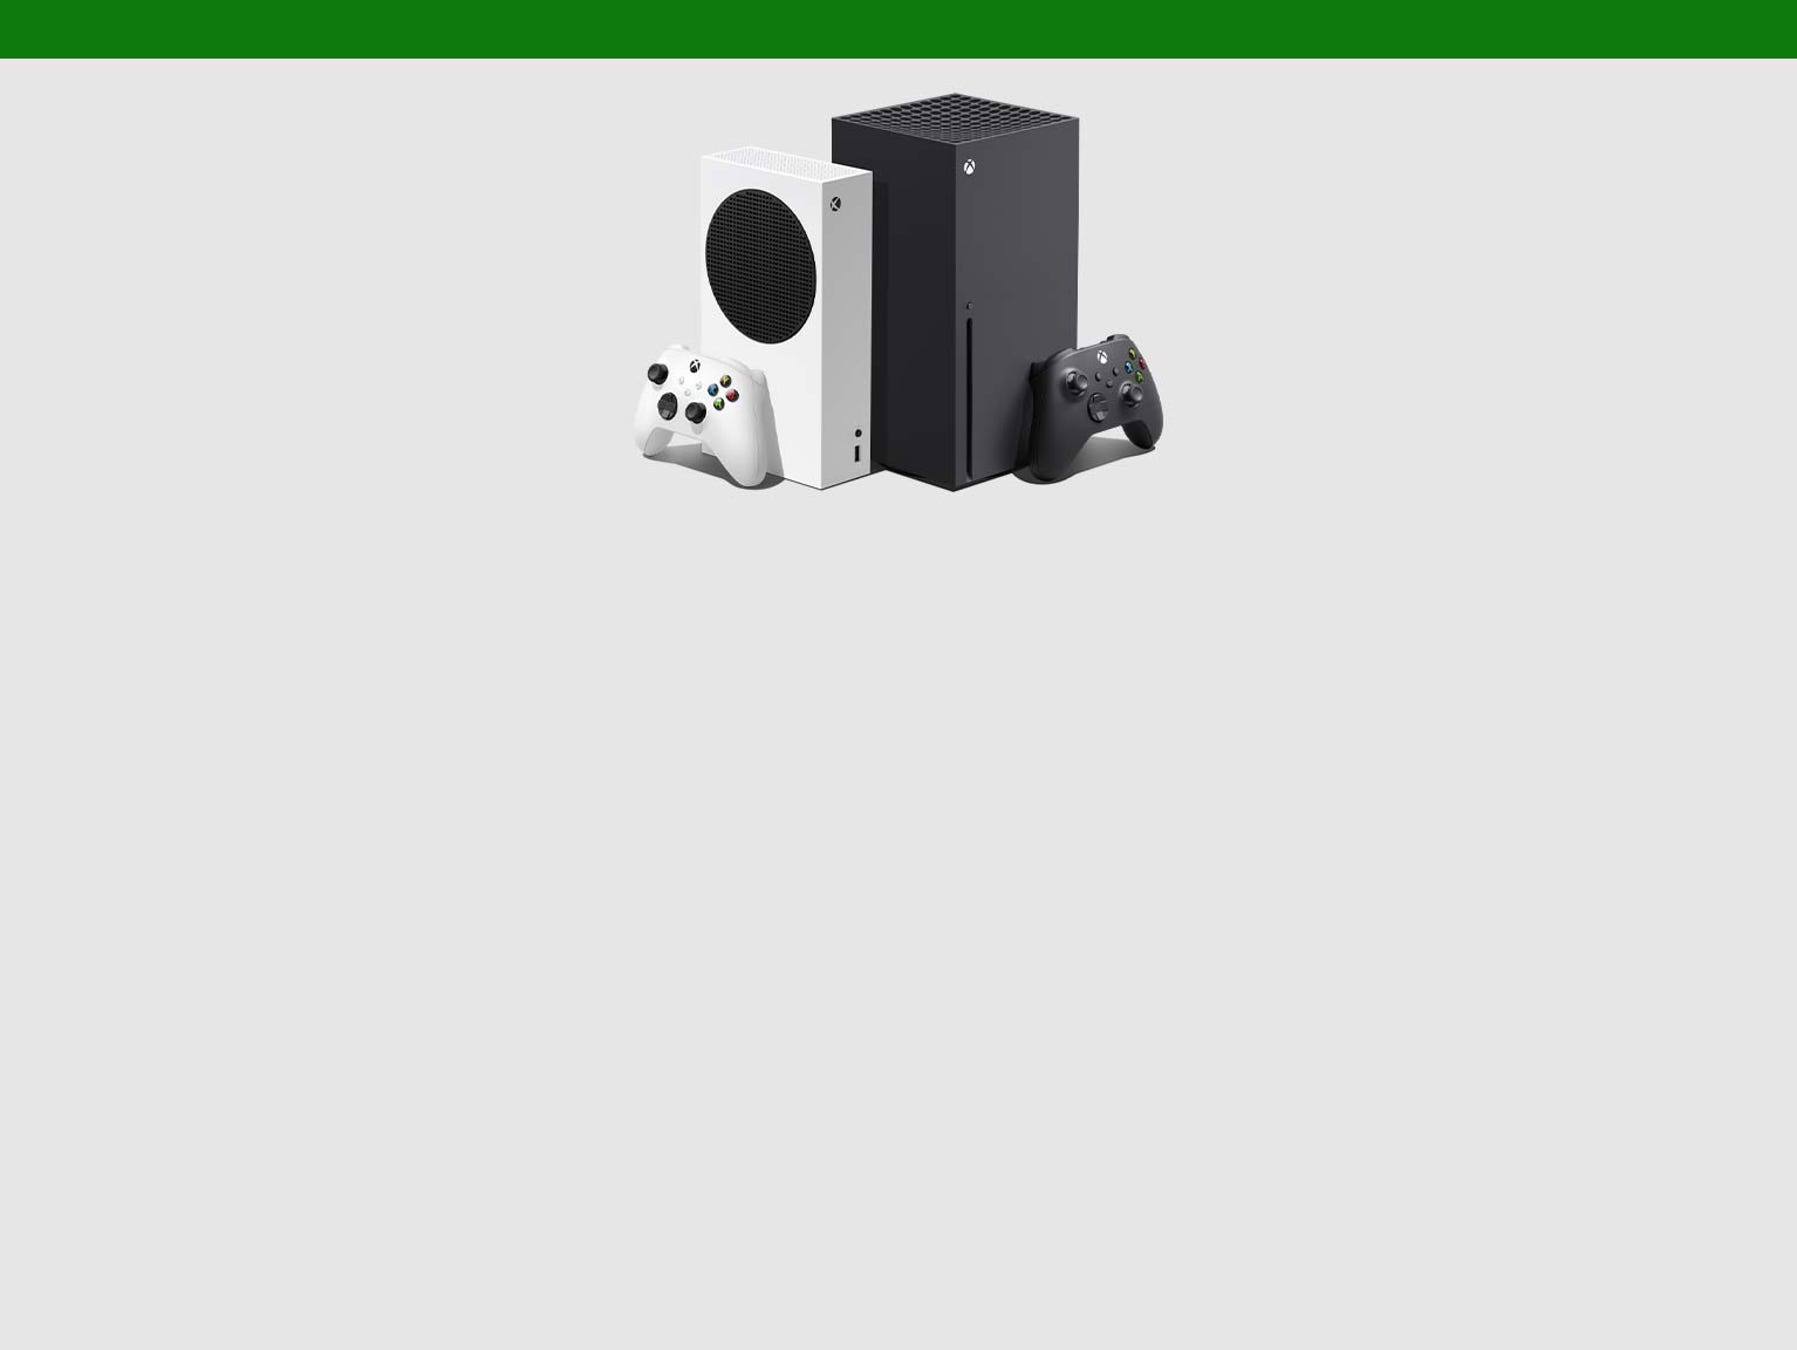 Xbox series x next restock canada - Top vector, png, psd files on